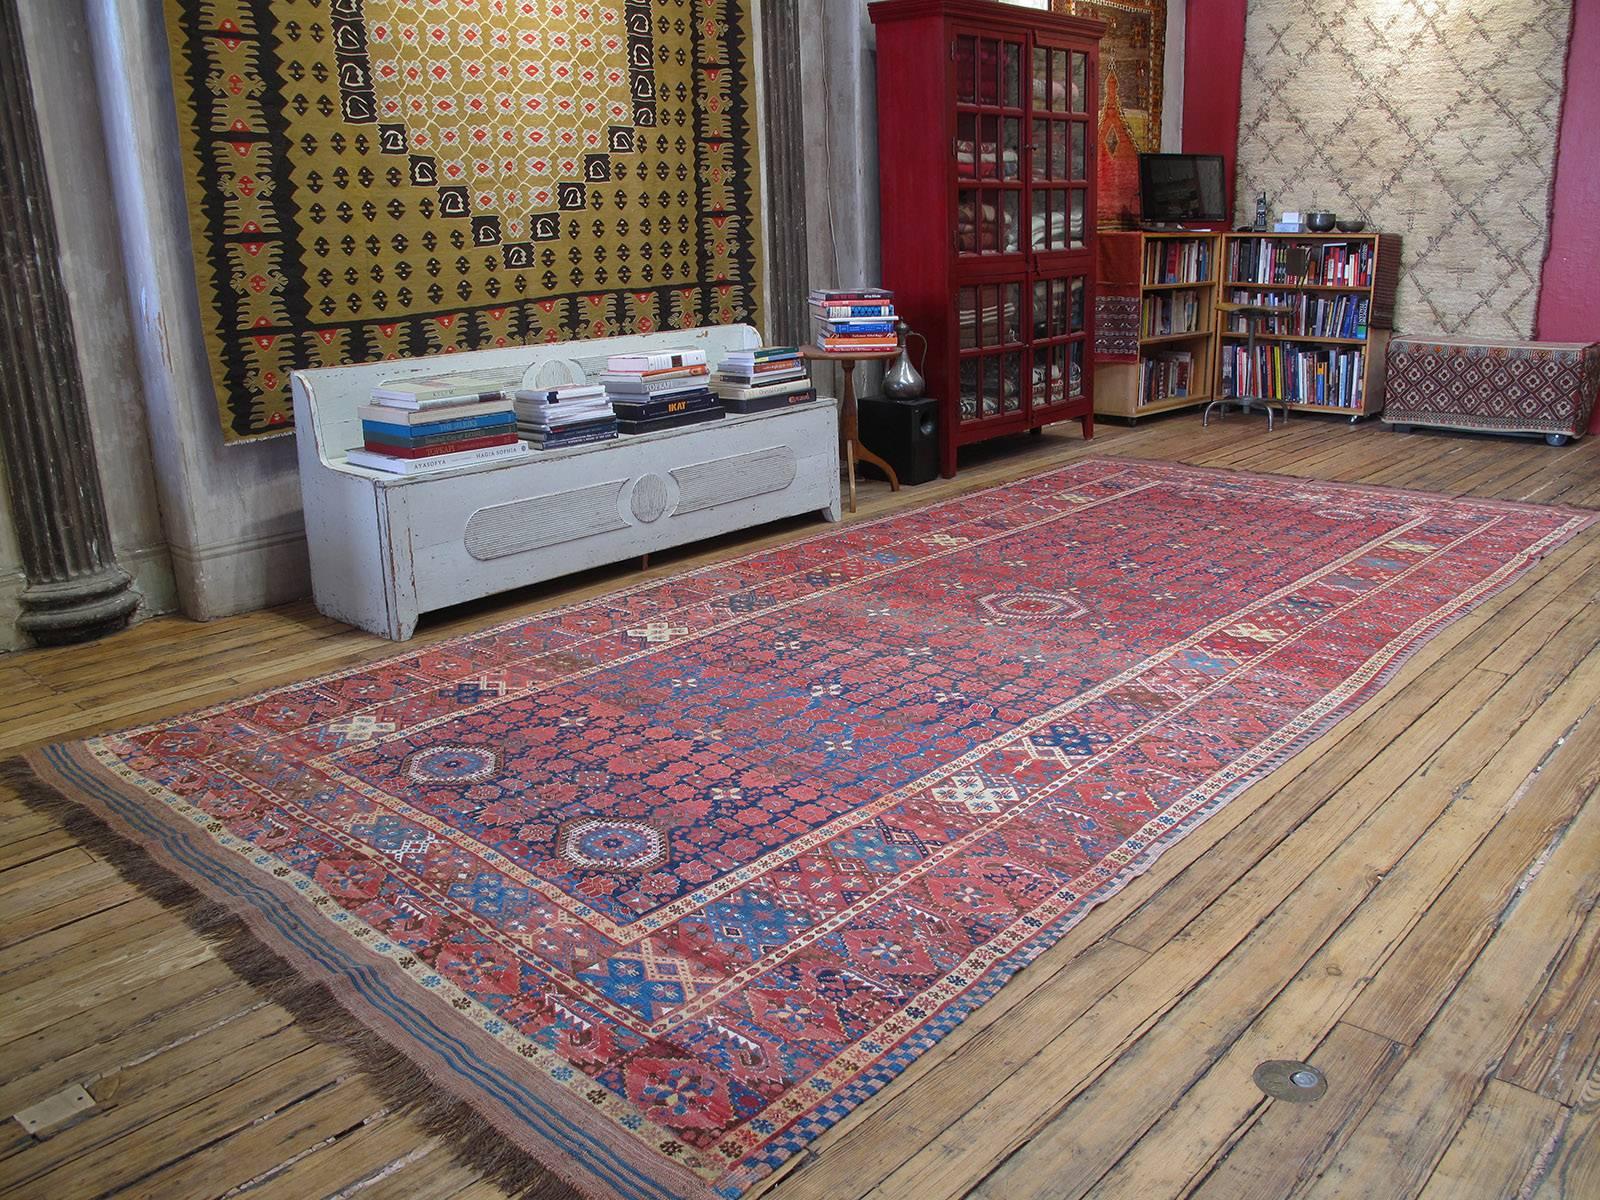 Fantastic Antique Beshir carpet or rug. A very handsome antique carpet or rug from Central Asia, attributed to the Ersari Turkmen tribes settled along the Amu Darya River (Oxus in Latin sources). Large carpets like this, in elongated format and